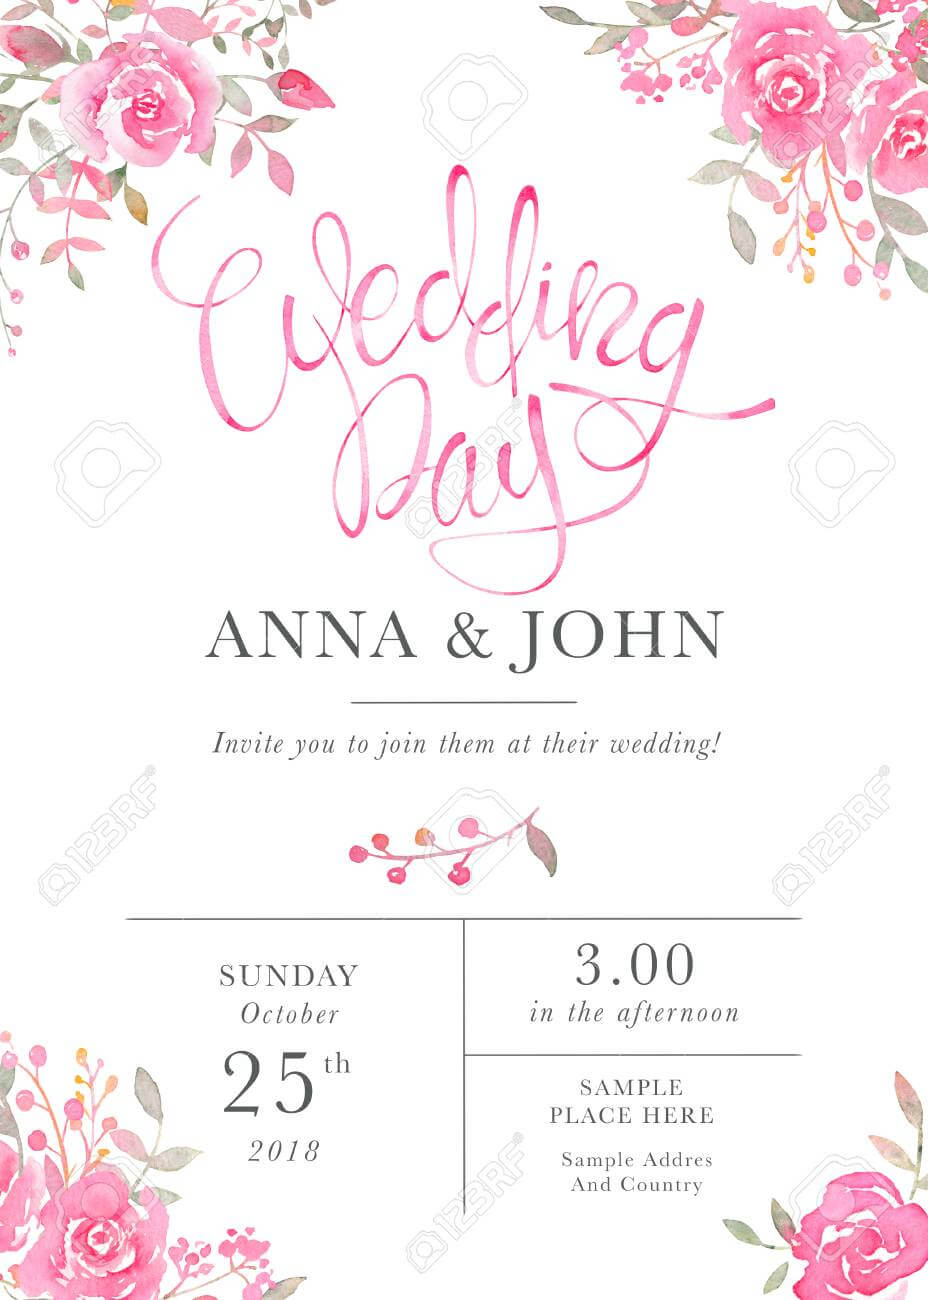 Wedding Invitation Card Template With Watercolor Rose Flowers Intended For Sample Wedding Invitation Cards Templates